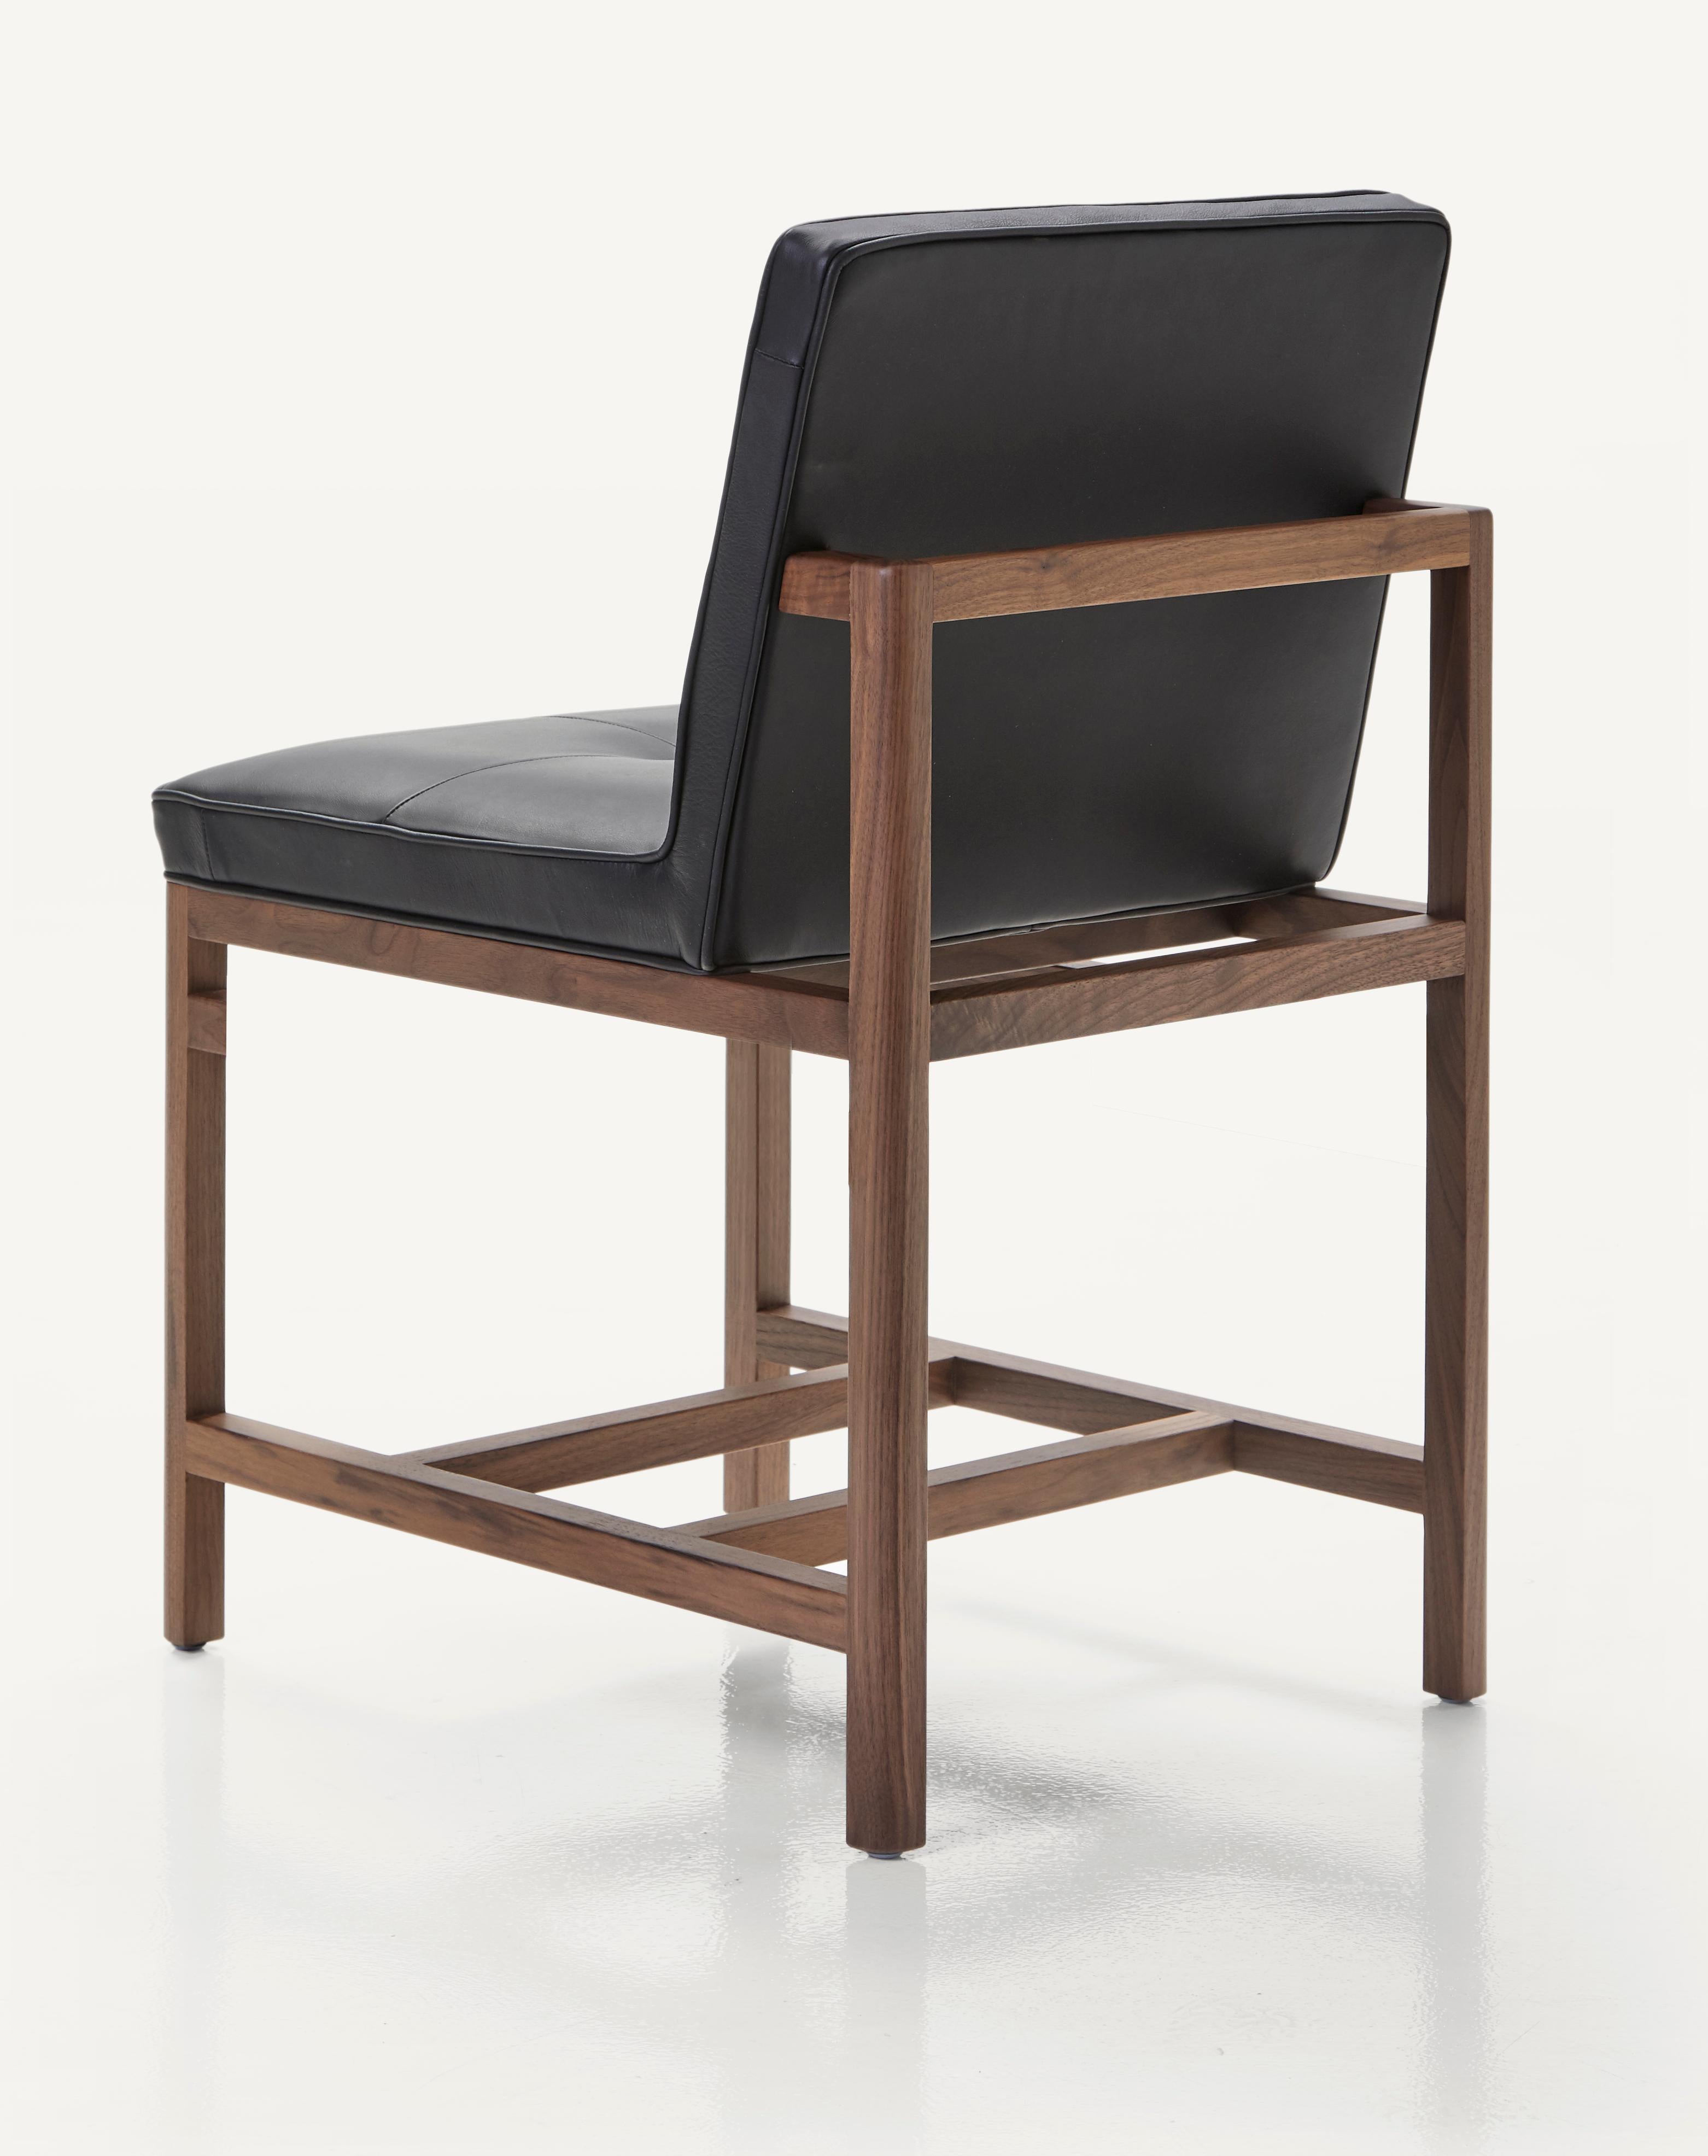 For Sale: Black (Comfort 99991 Black) Wood Frame Armless Chair Petit in Walnut and Leather Designed by Craig Bassam 2